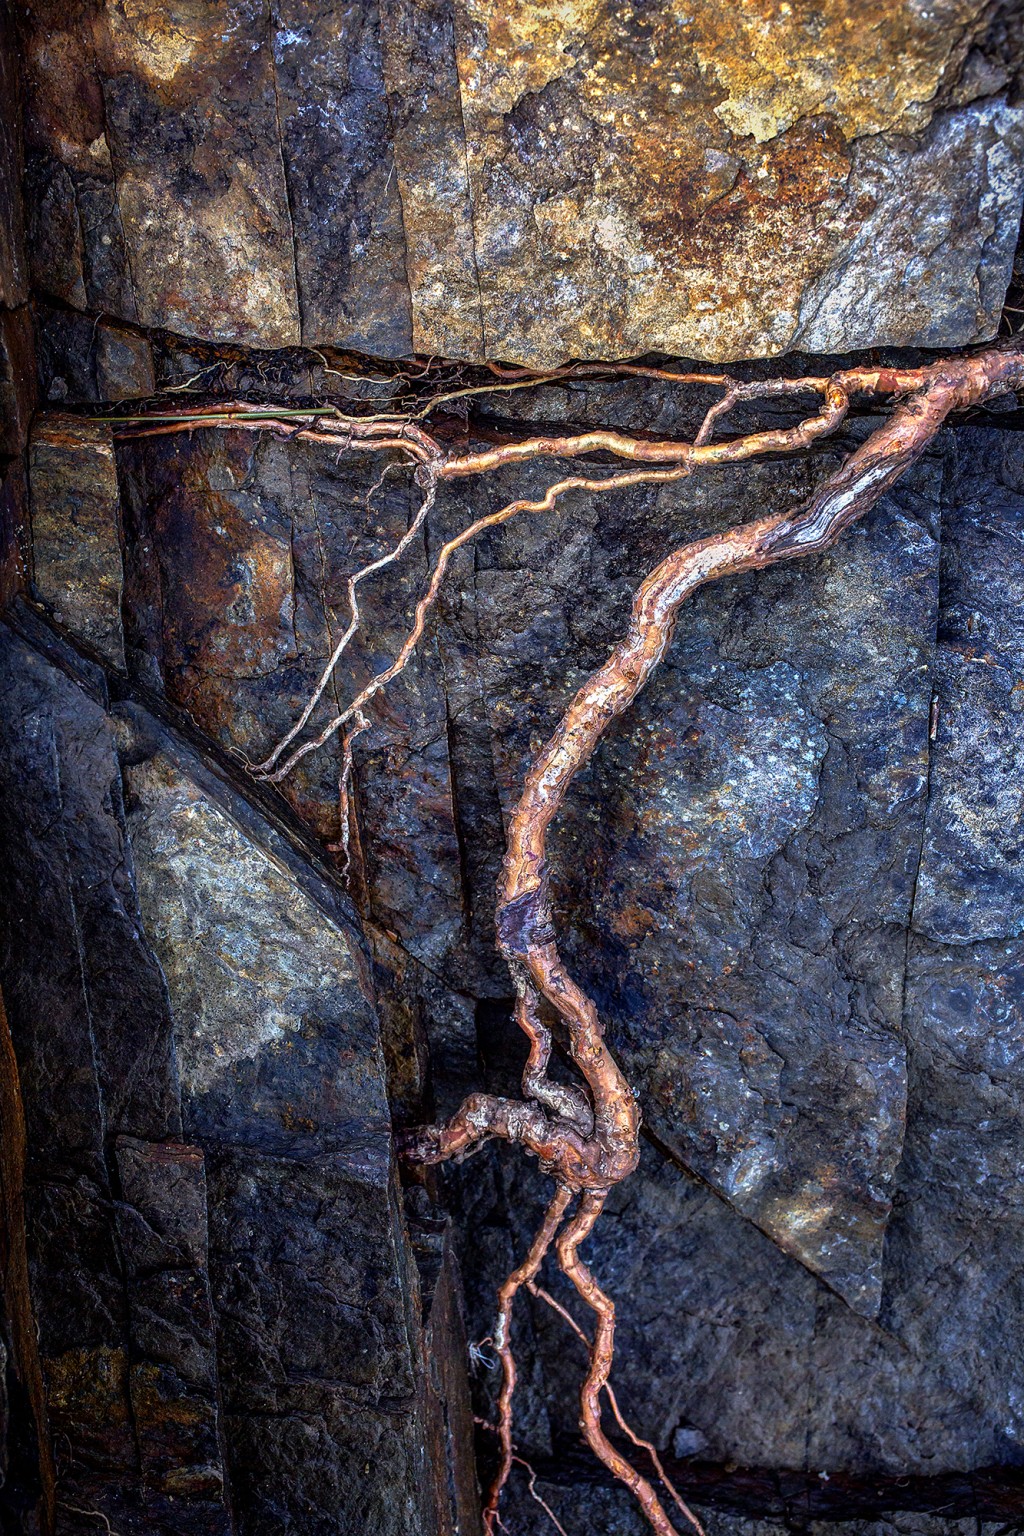 "Roots to Rewire" is one of the photos on display in Tim Greenway's exhibit